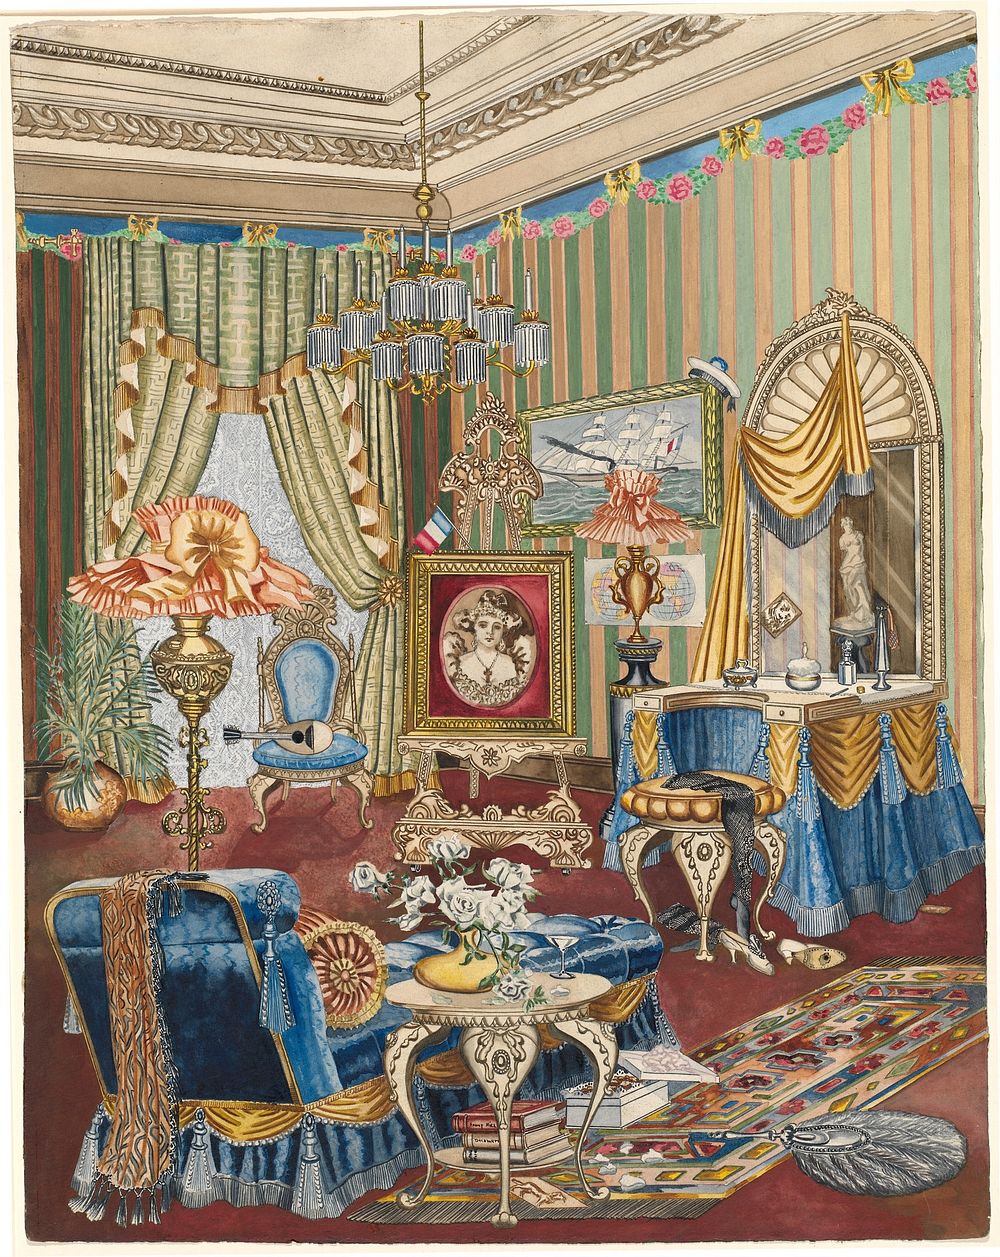 Boudoir (ca. 1931) by Perkins Harnly.  